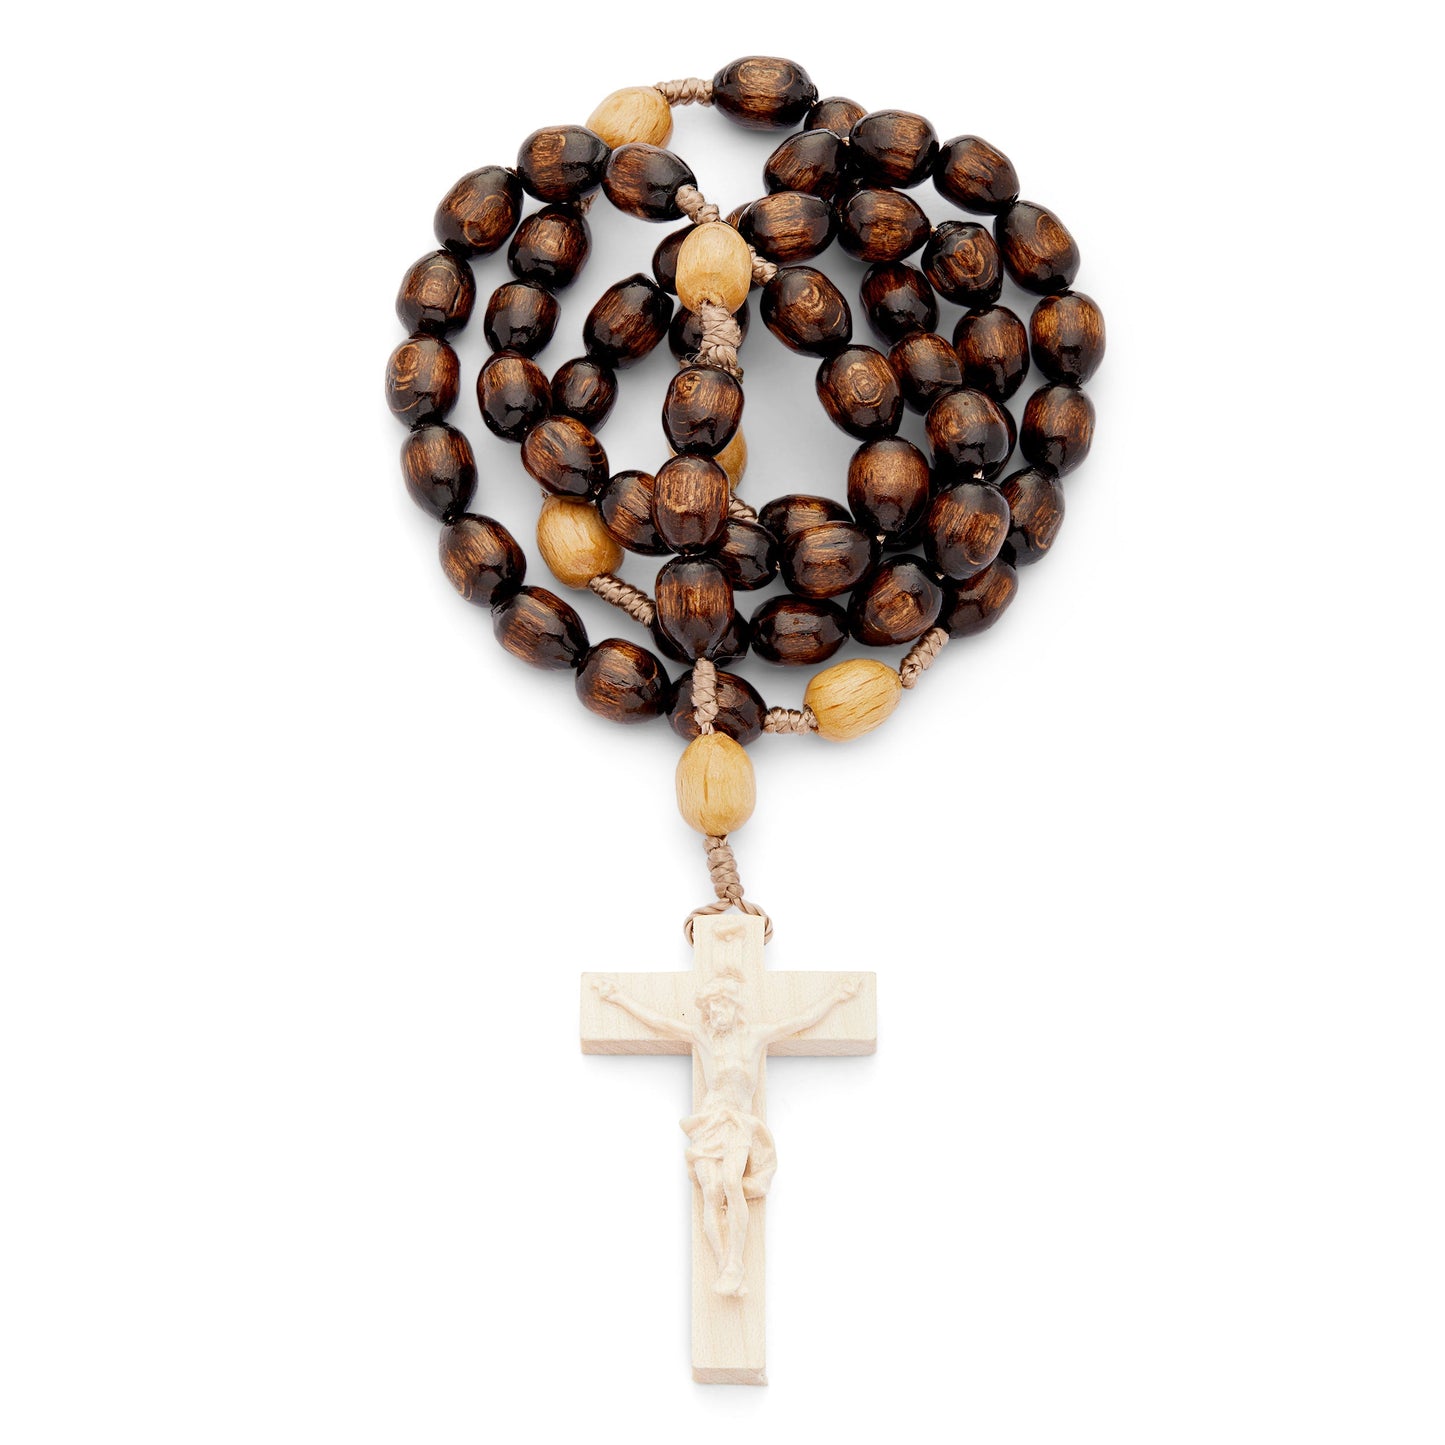 MONDO CATTOLICO Prayer Beads Natural Wood and Rope Rosary with Handcrafted Cross